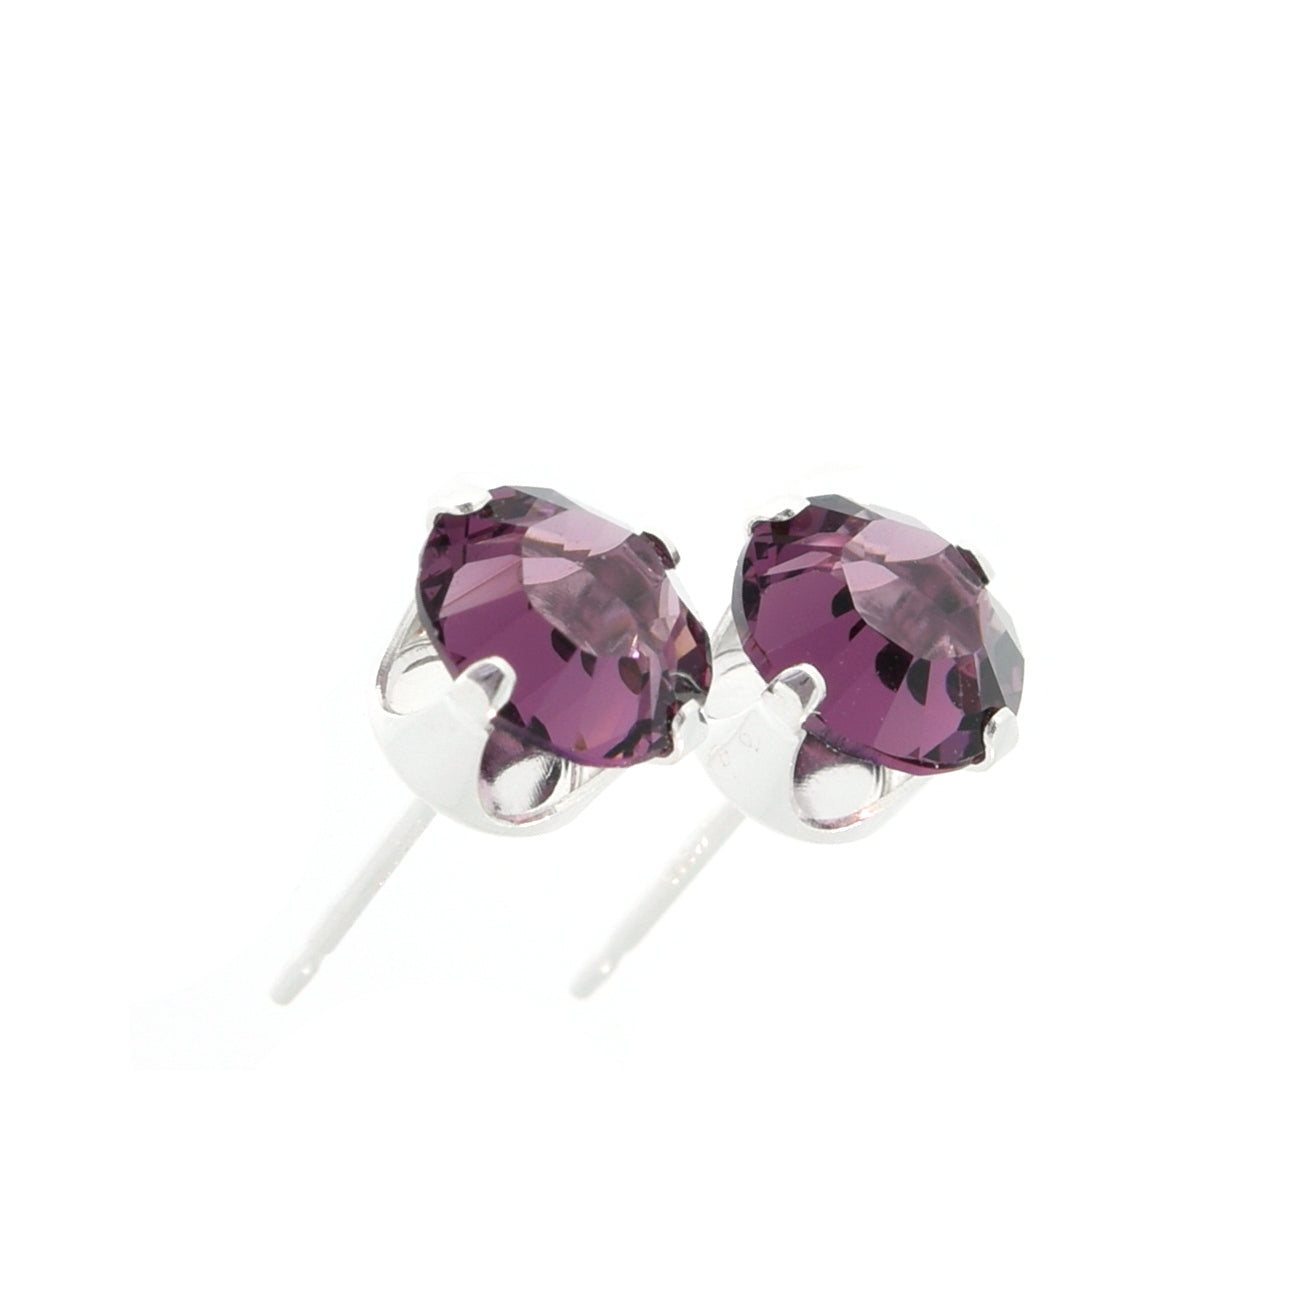 pewterhooter® Women's Classic Collection 925 Sterling silver earrings with sparkling Amethyst channel crystals, packaged in a gift box for any occasion.